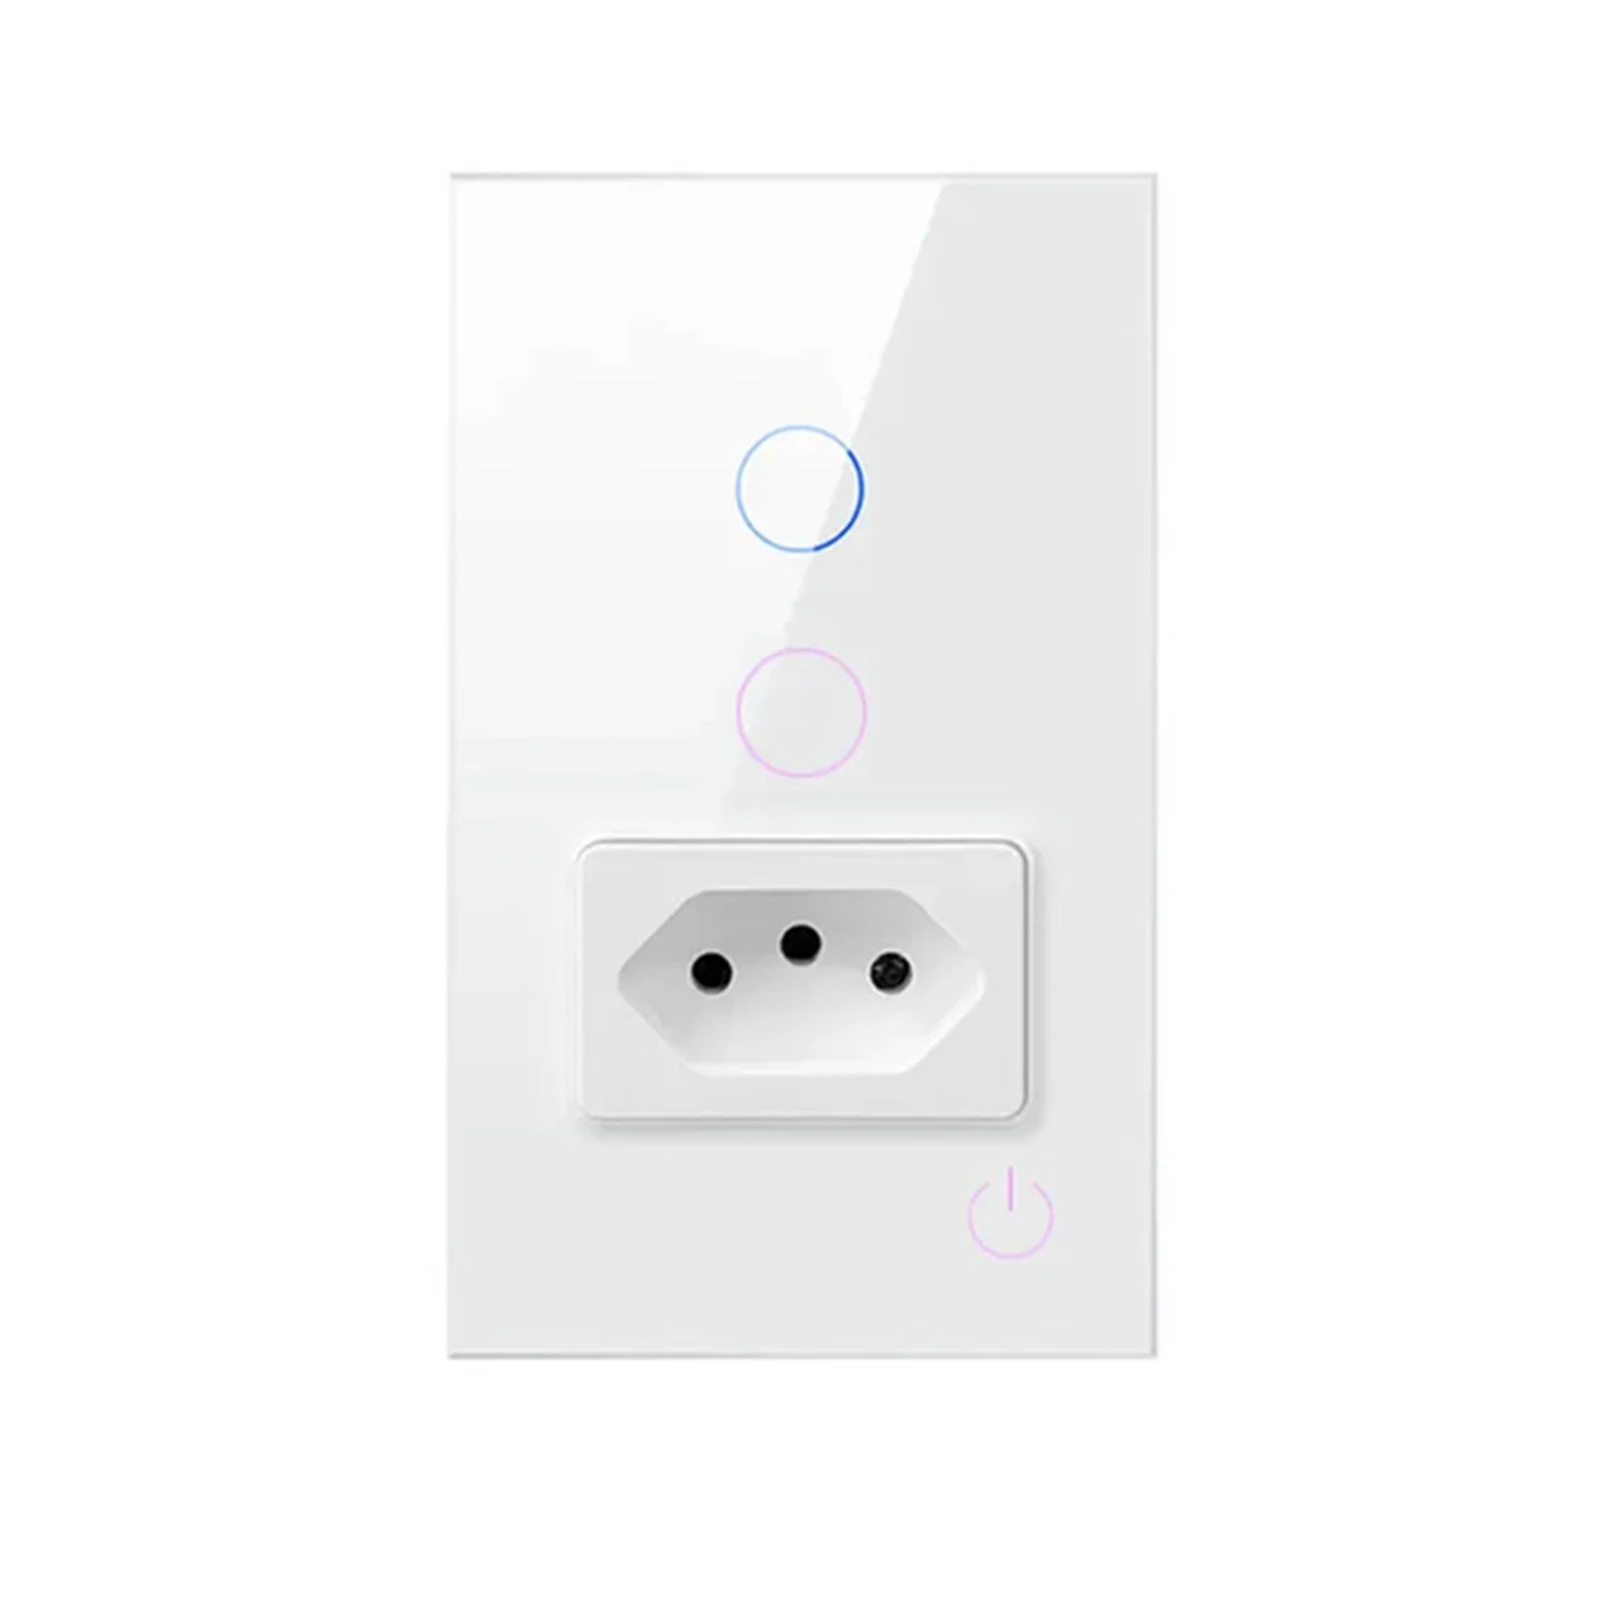 

Durable Wall Light Switch Brazilian Regulation 1/2 Gang Touch 110V-240V 300W 50/60Hz Fast Charge Home Smart Switch